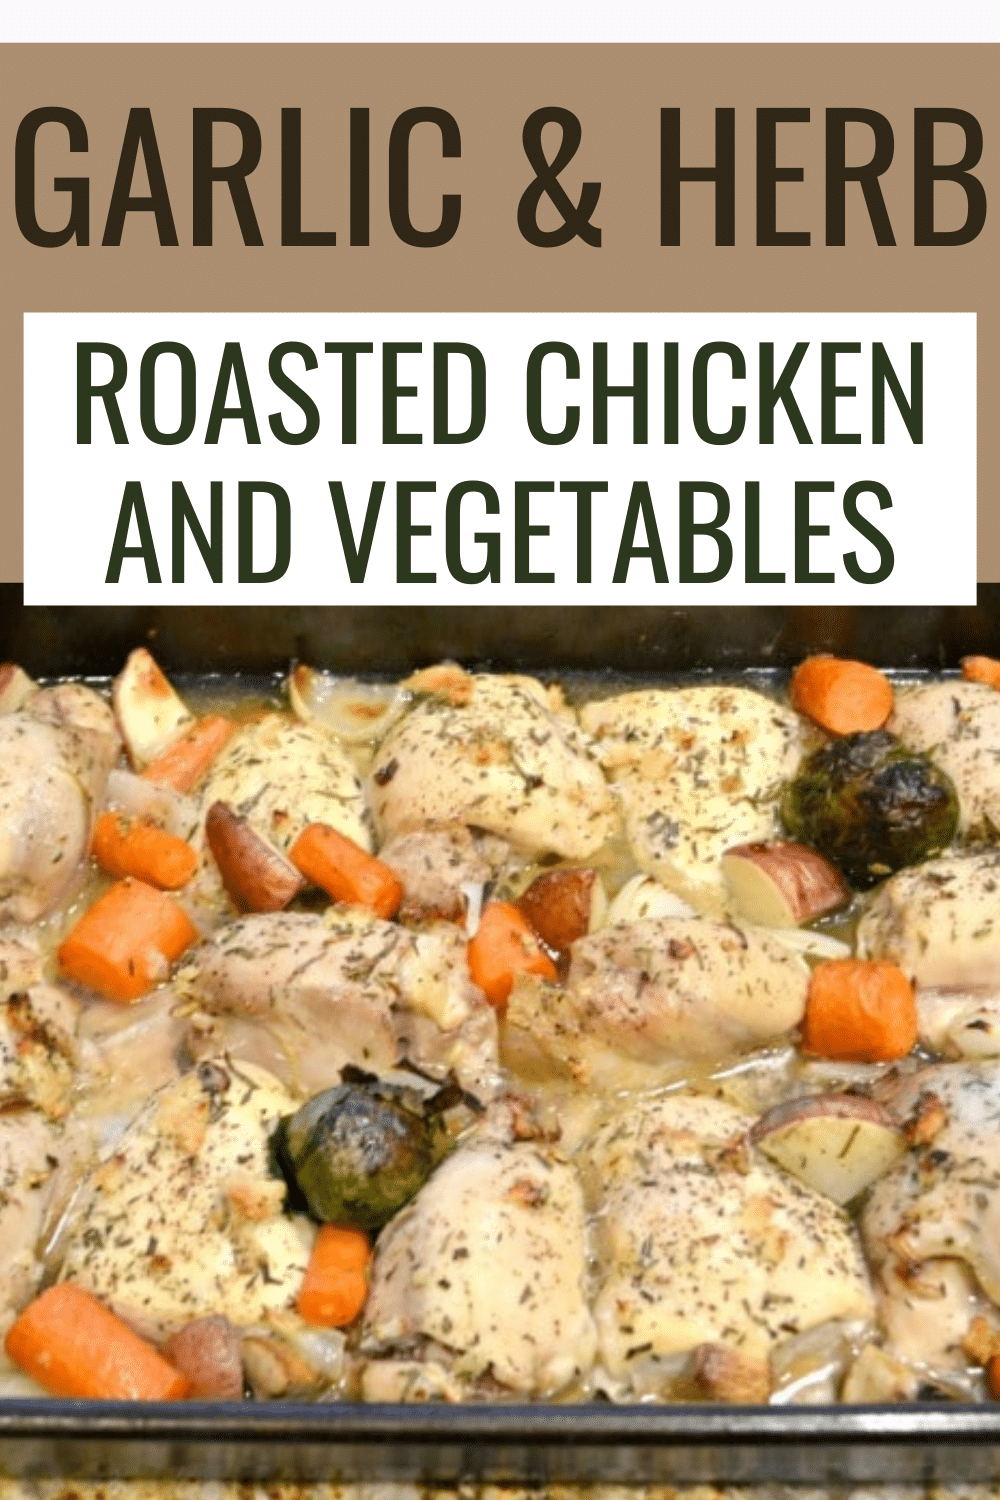 Savory garlic & herb roasted chicken and vegetables dish is a simple weeknight recipe. It's a hearty meal that is easy to put together. #roastedchicken #roastedvegetables #chicken #vegetables #recipe via @wondermomwannab